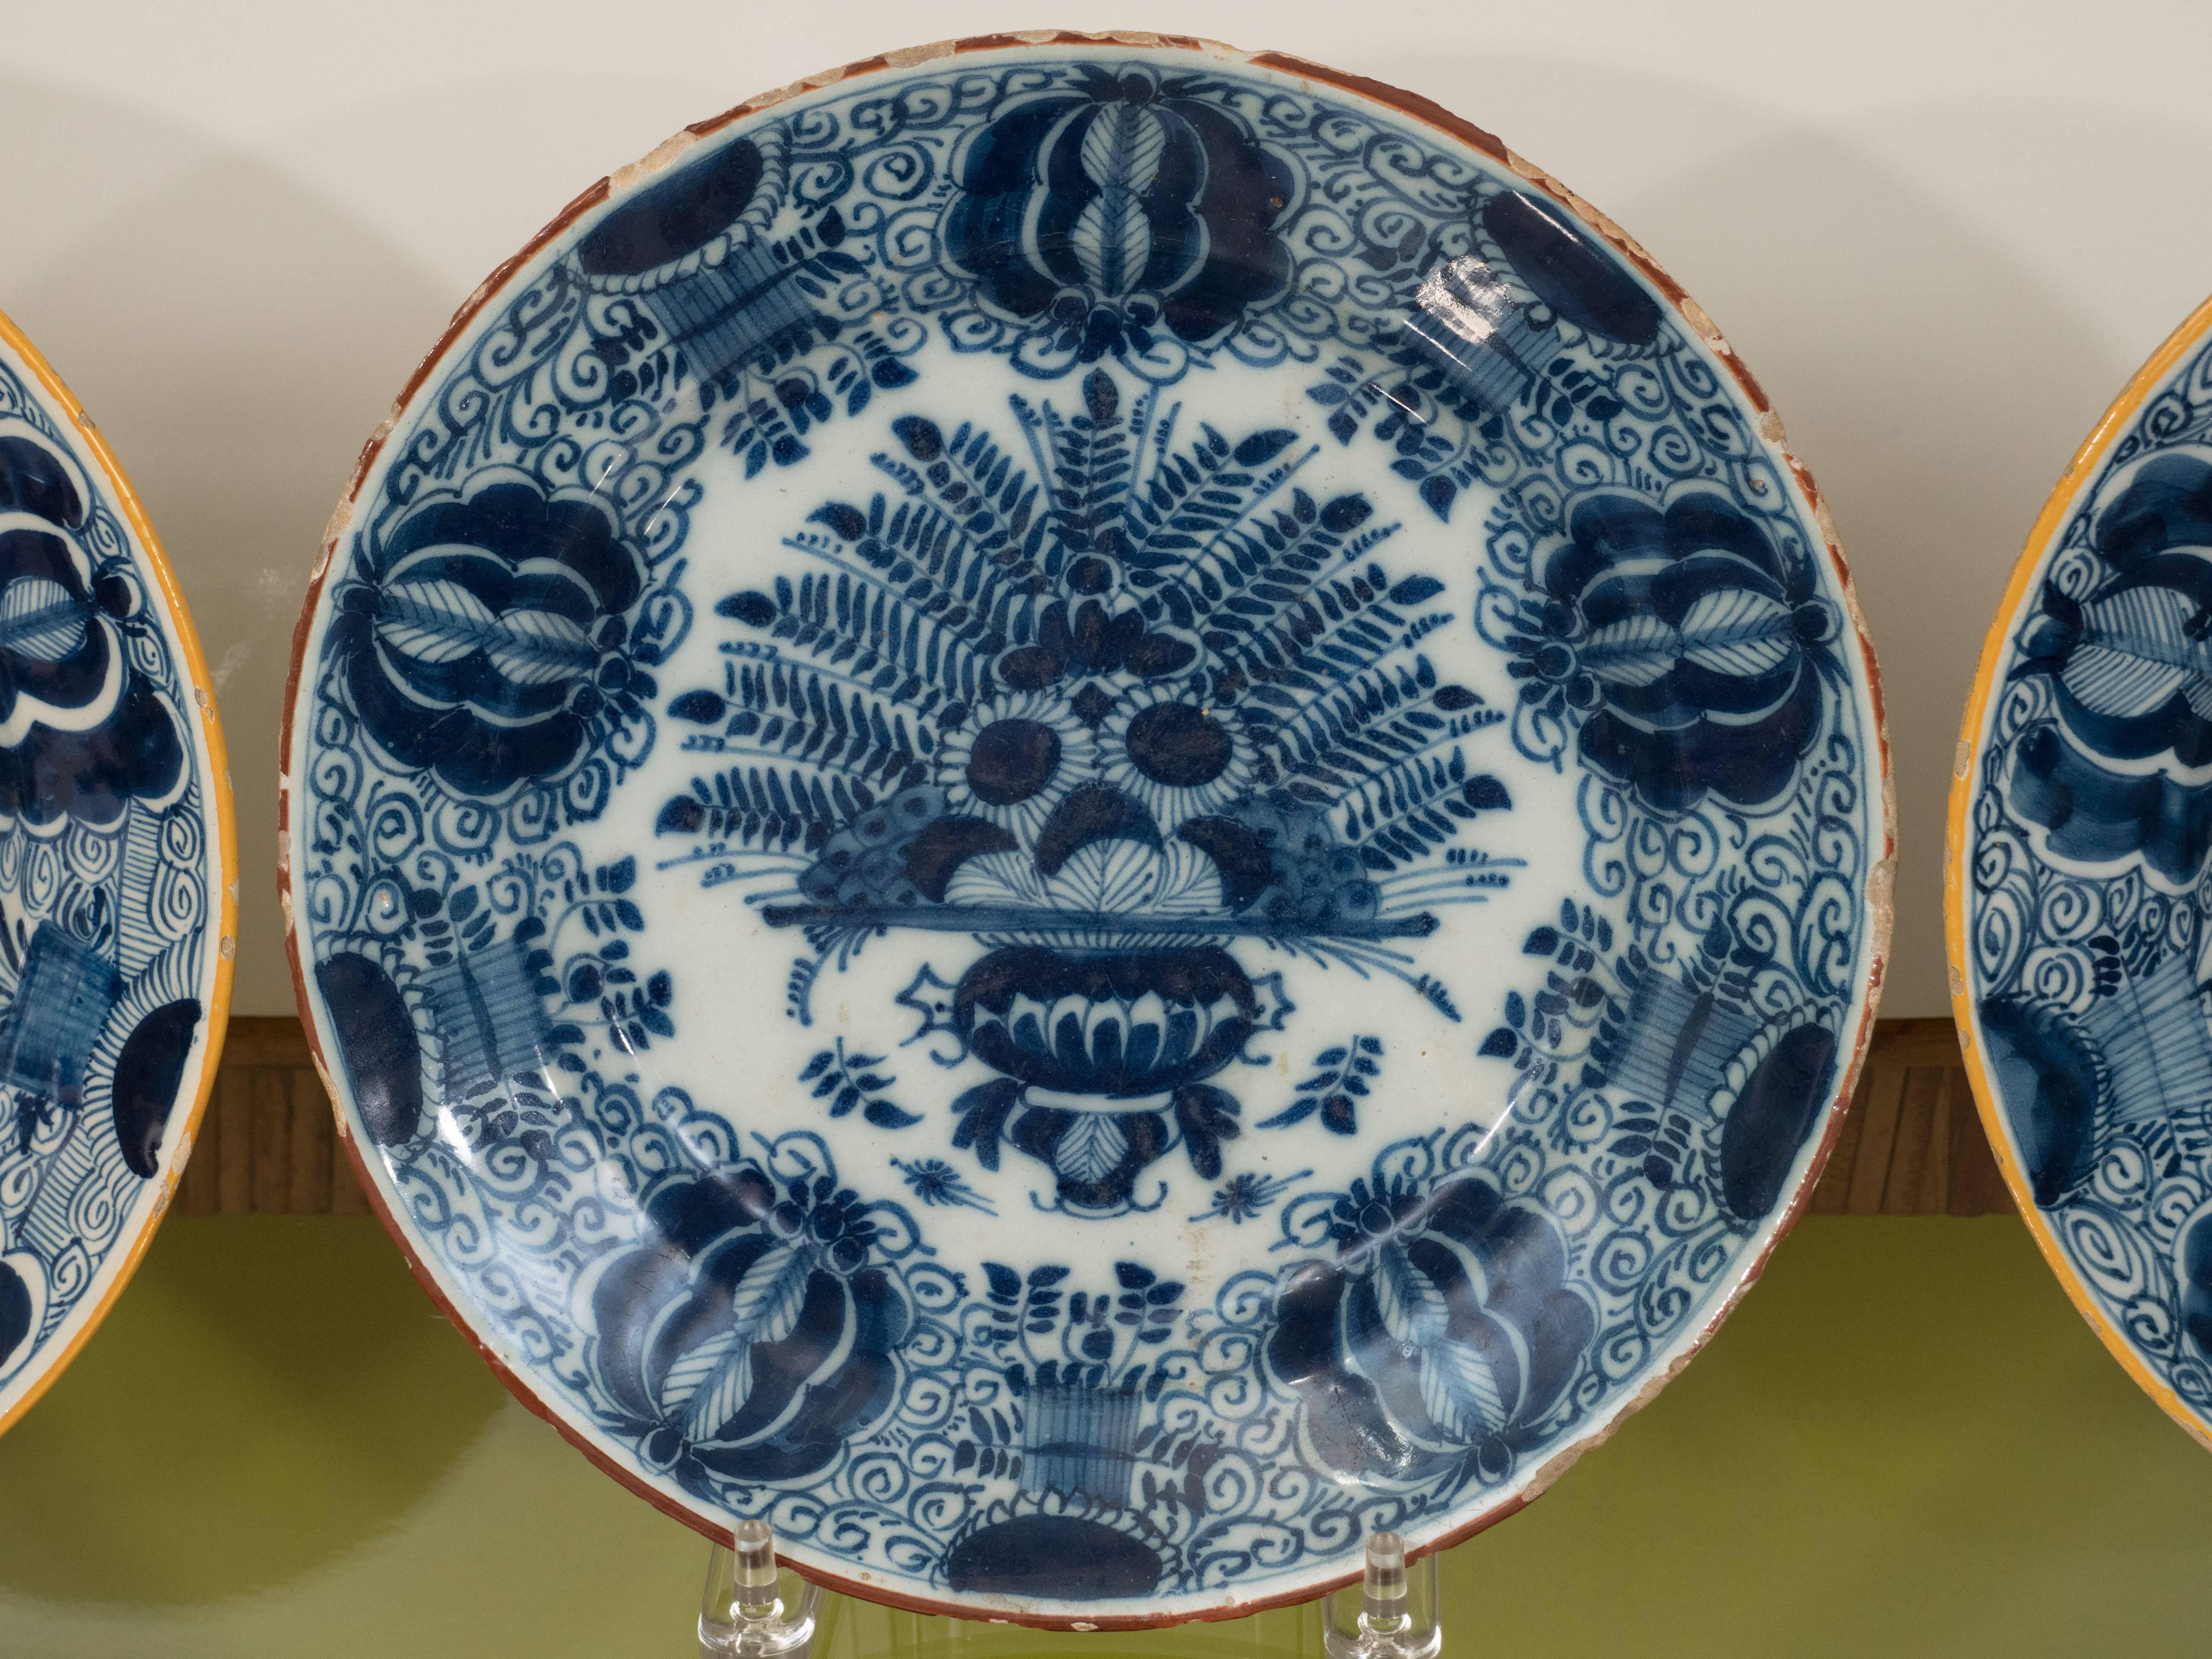 A series of three Dutch delft blue and white chargers hand-painted in a stunning deep blue with a yellow rim. The hand-painted design is known as the 